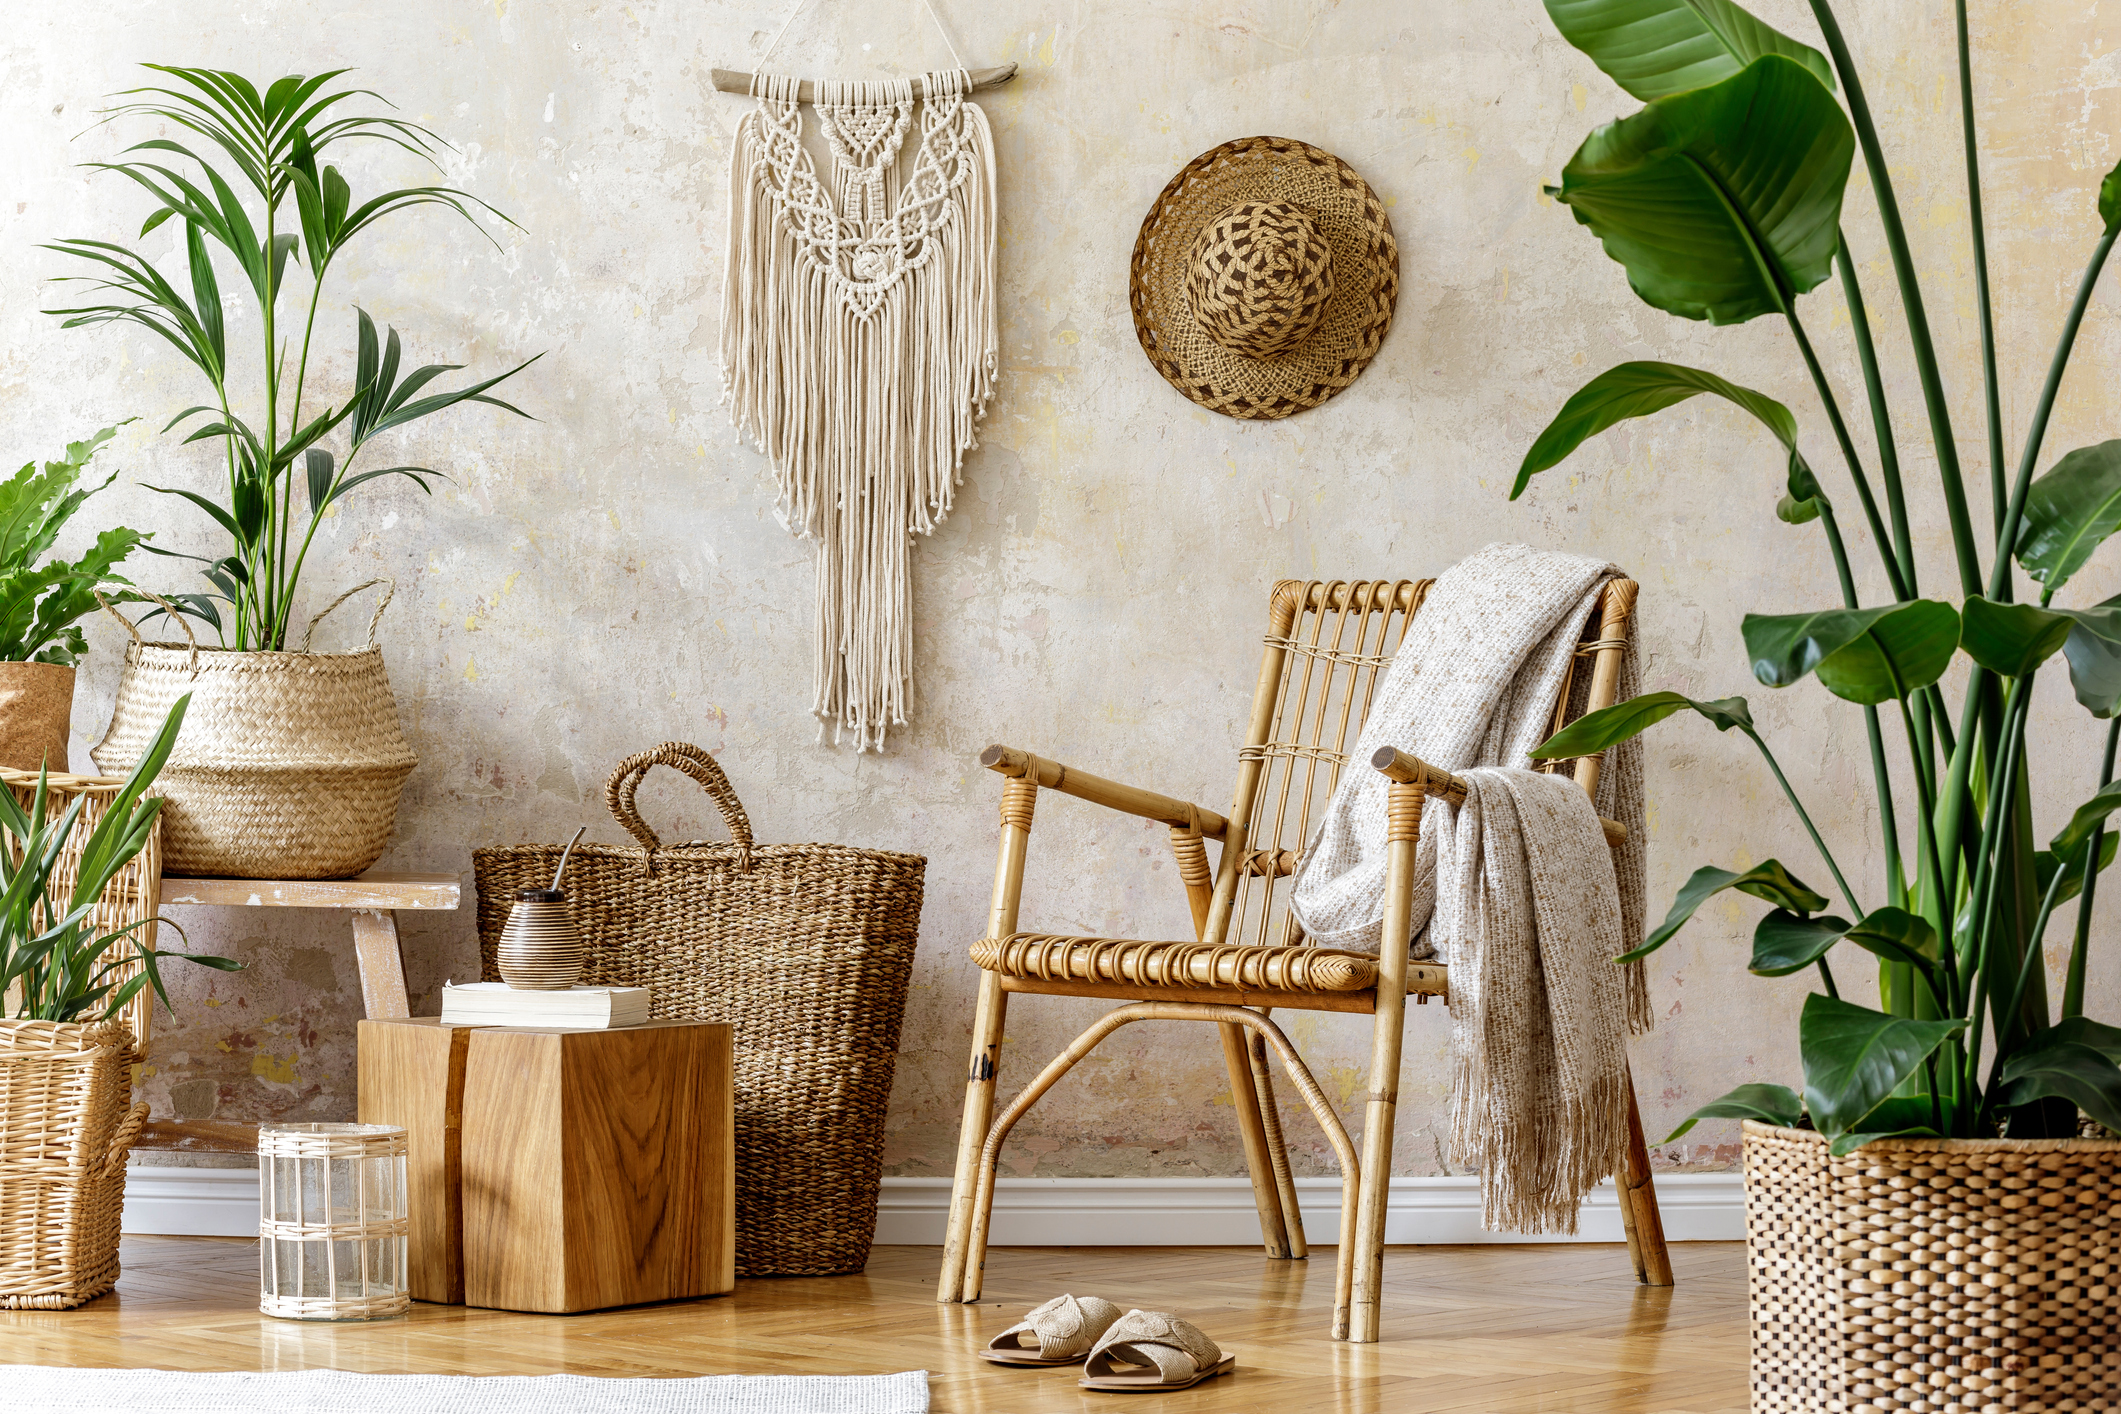 5 Tips on How to Nail an Earthy Theme | Natural Home Decor